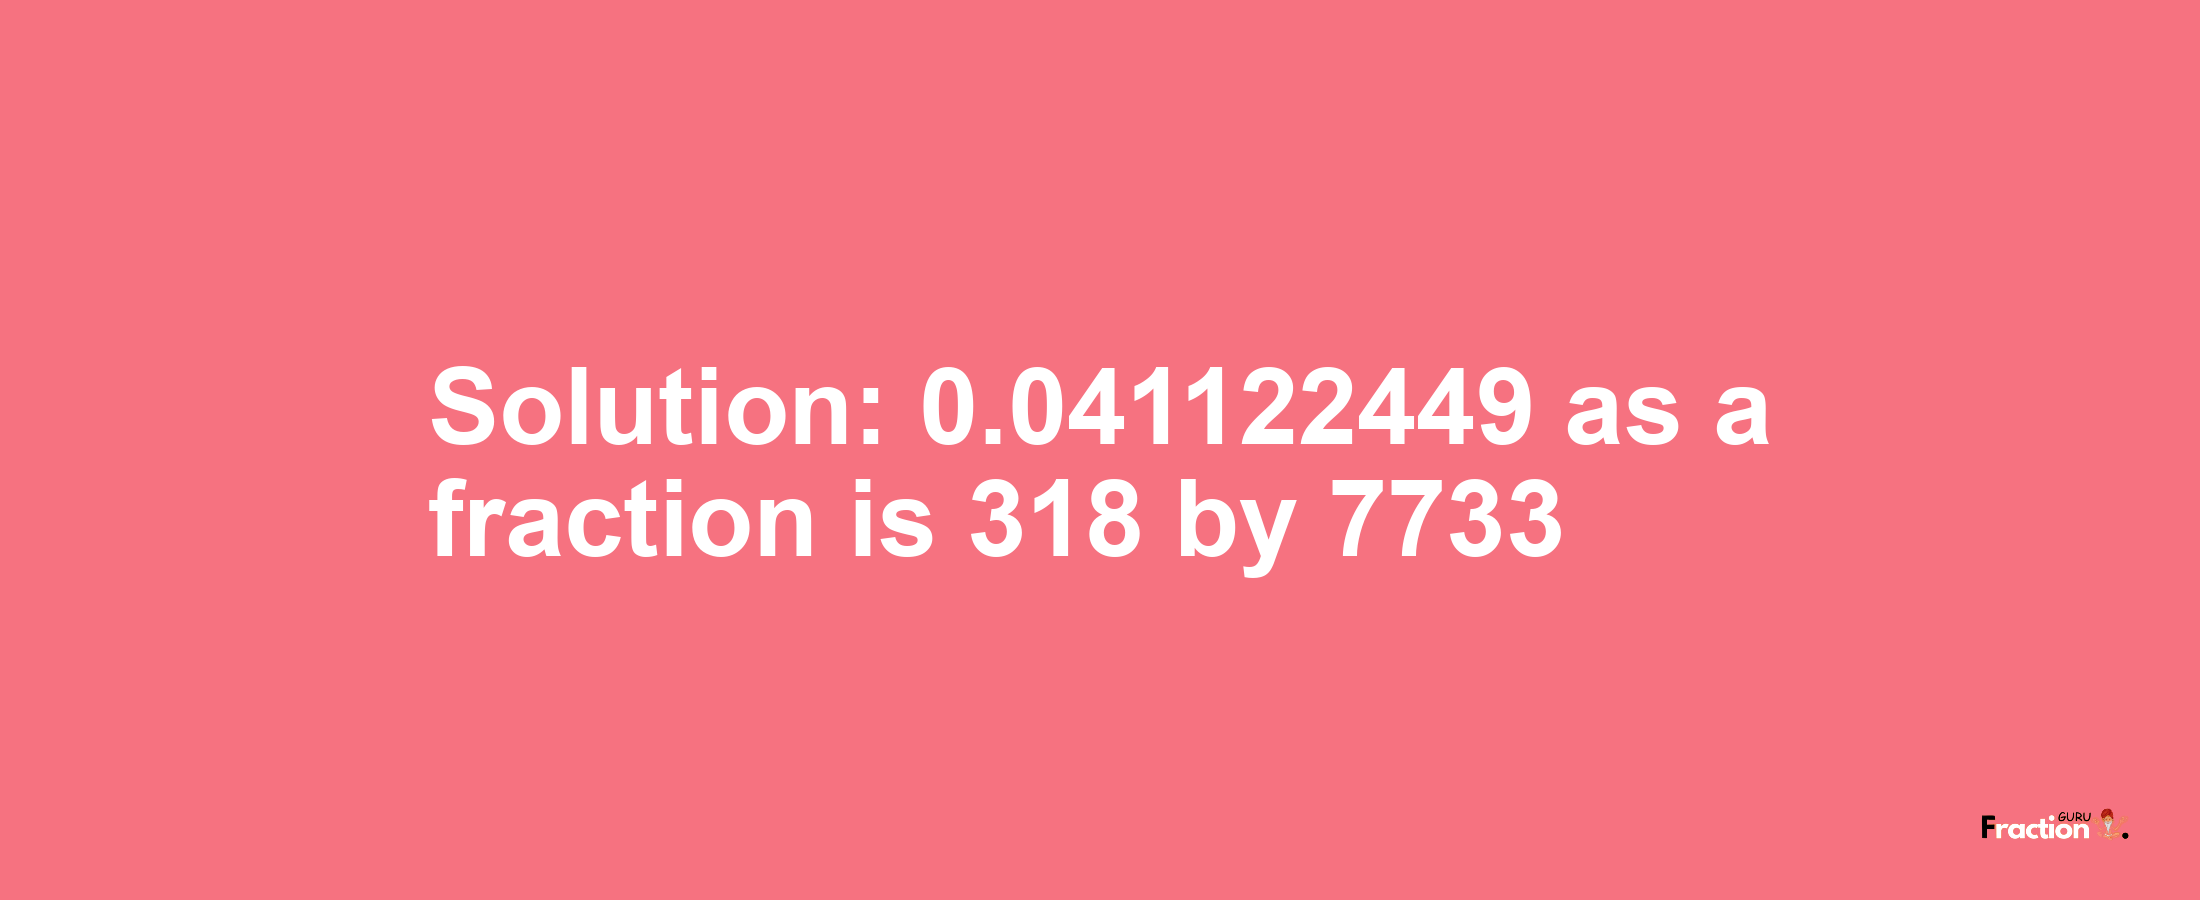 Solution:0.041122449 as a fraction is 318/7733